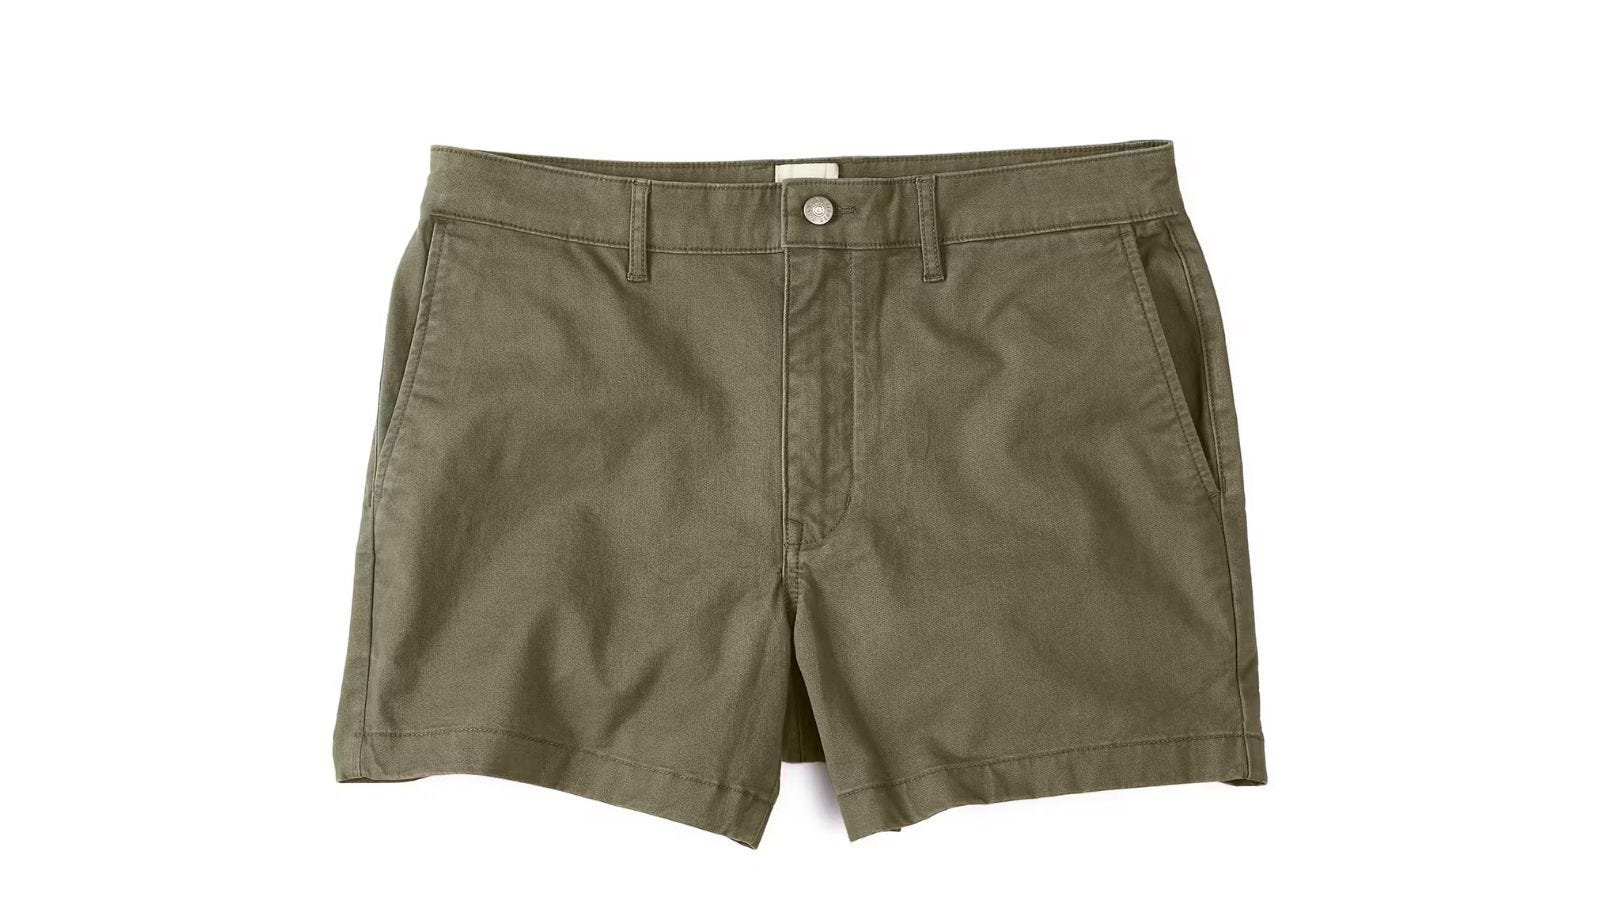 pair of olive green shorts against a white background